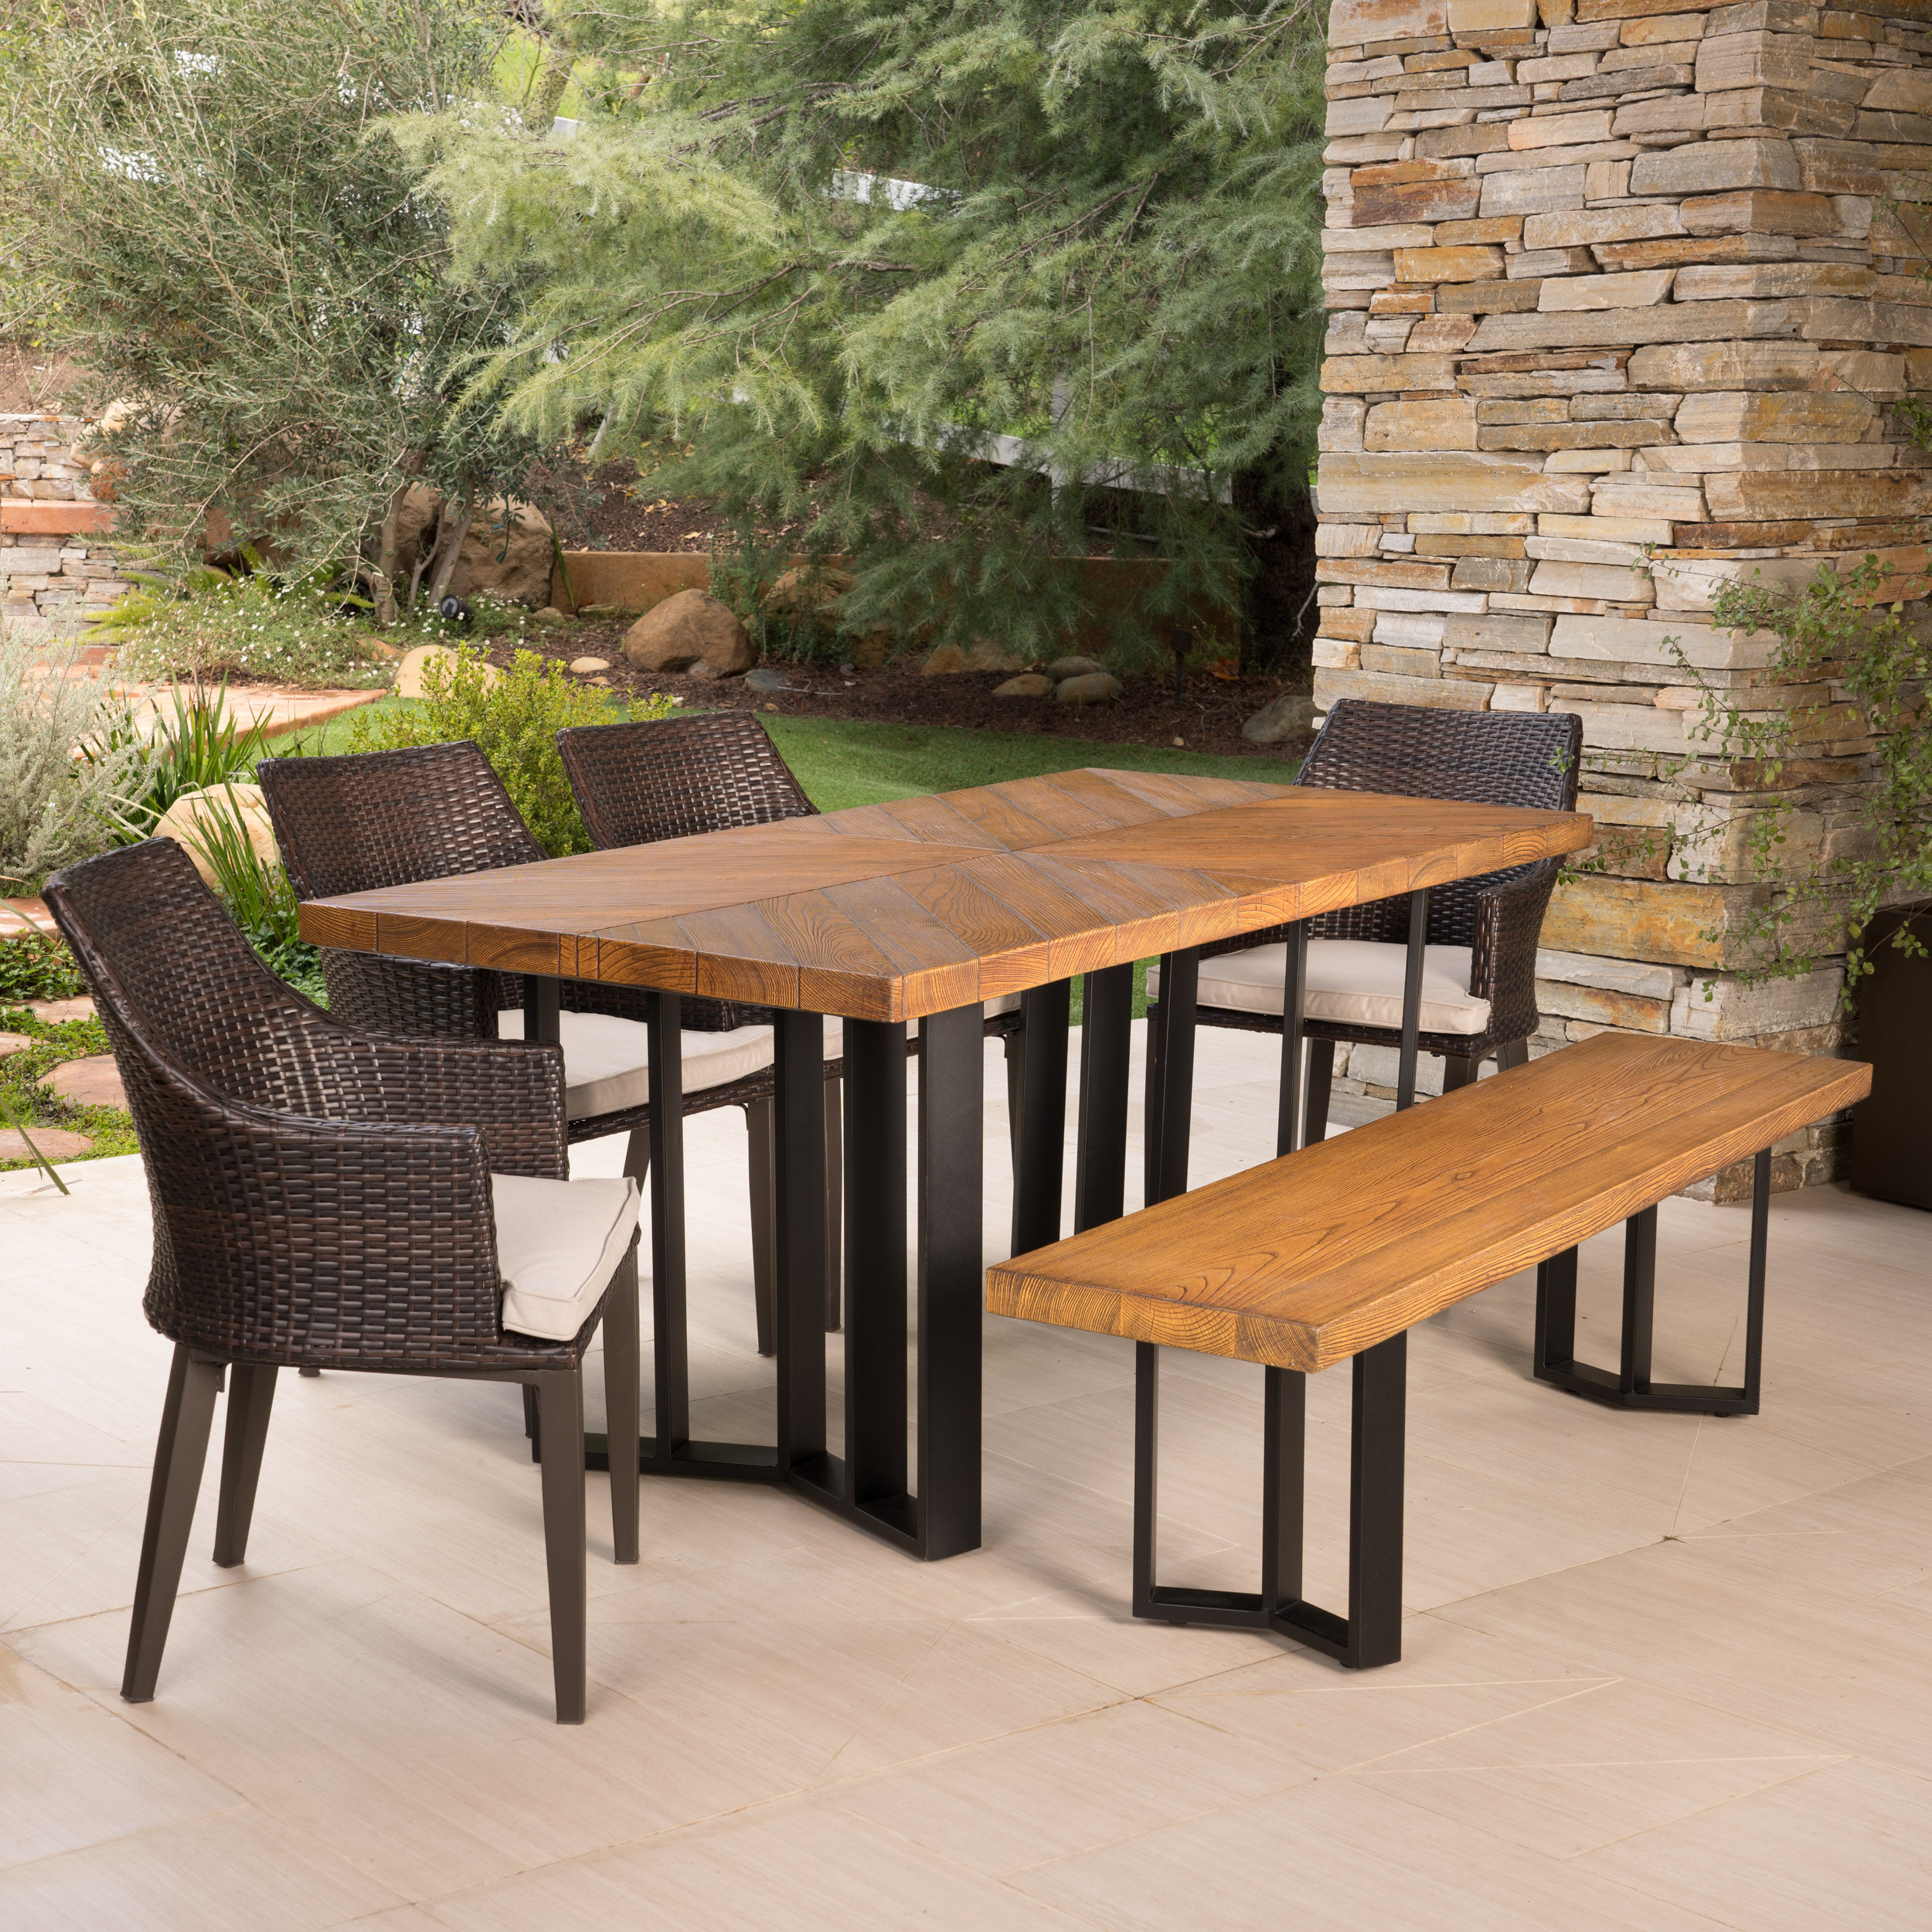 GDF Studio Sayveon Outdoor Wicker and Lightweight Concrete 6 Piece Dining Set with Bench, Textured Brown Walnut, Multibrown, and Black - image 3 of 13